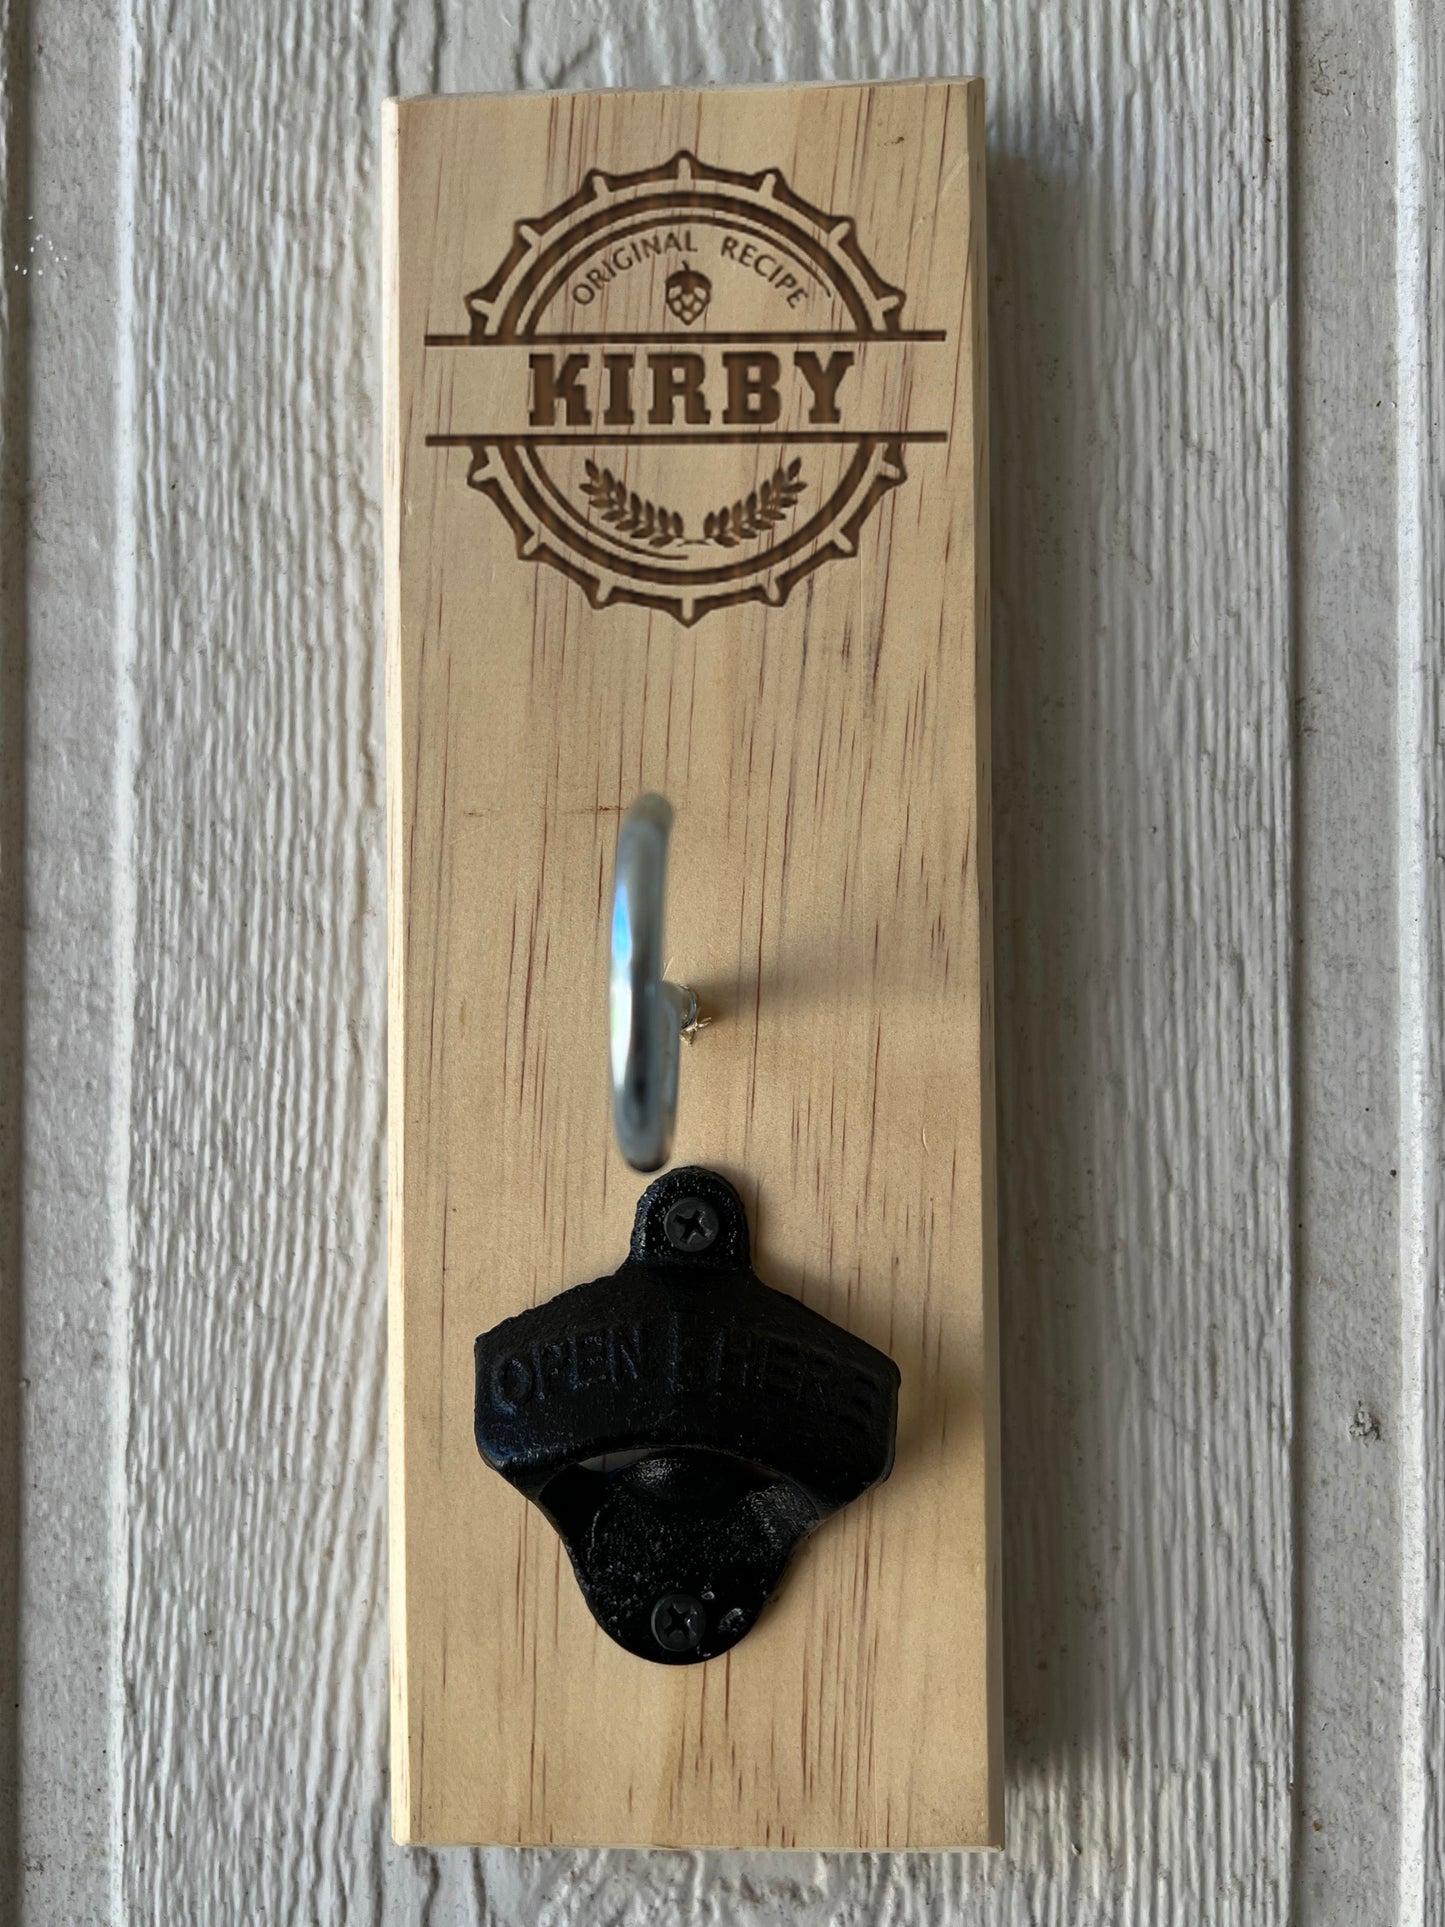 Custom Laser Engraved Ring Toss Game with Bottle Opener - Indoor/Outdoor Fun - Great Gift Idea For Groomsmen, Bars, Taverns and Bimini Fun